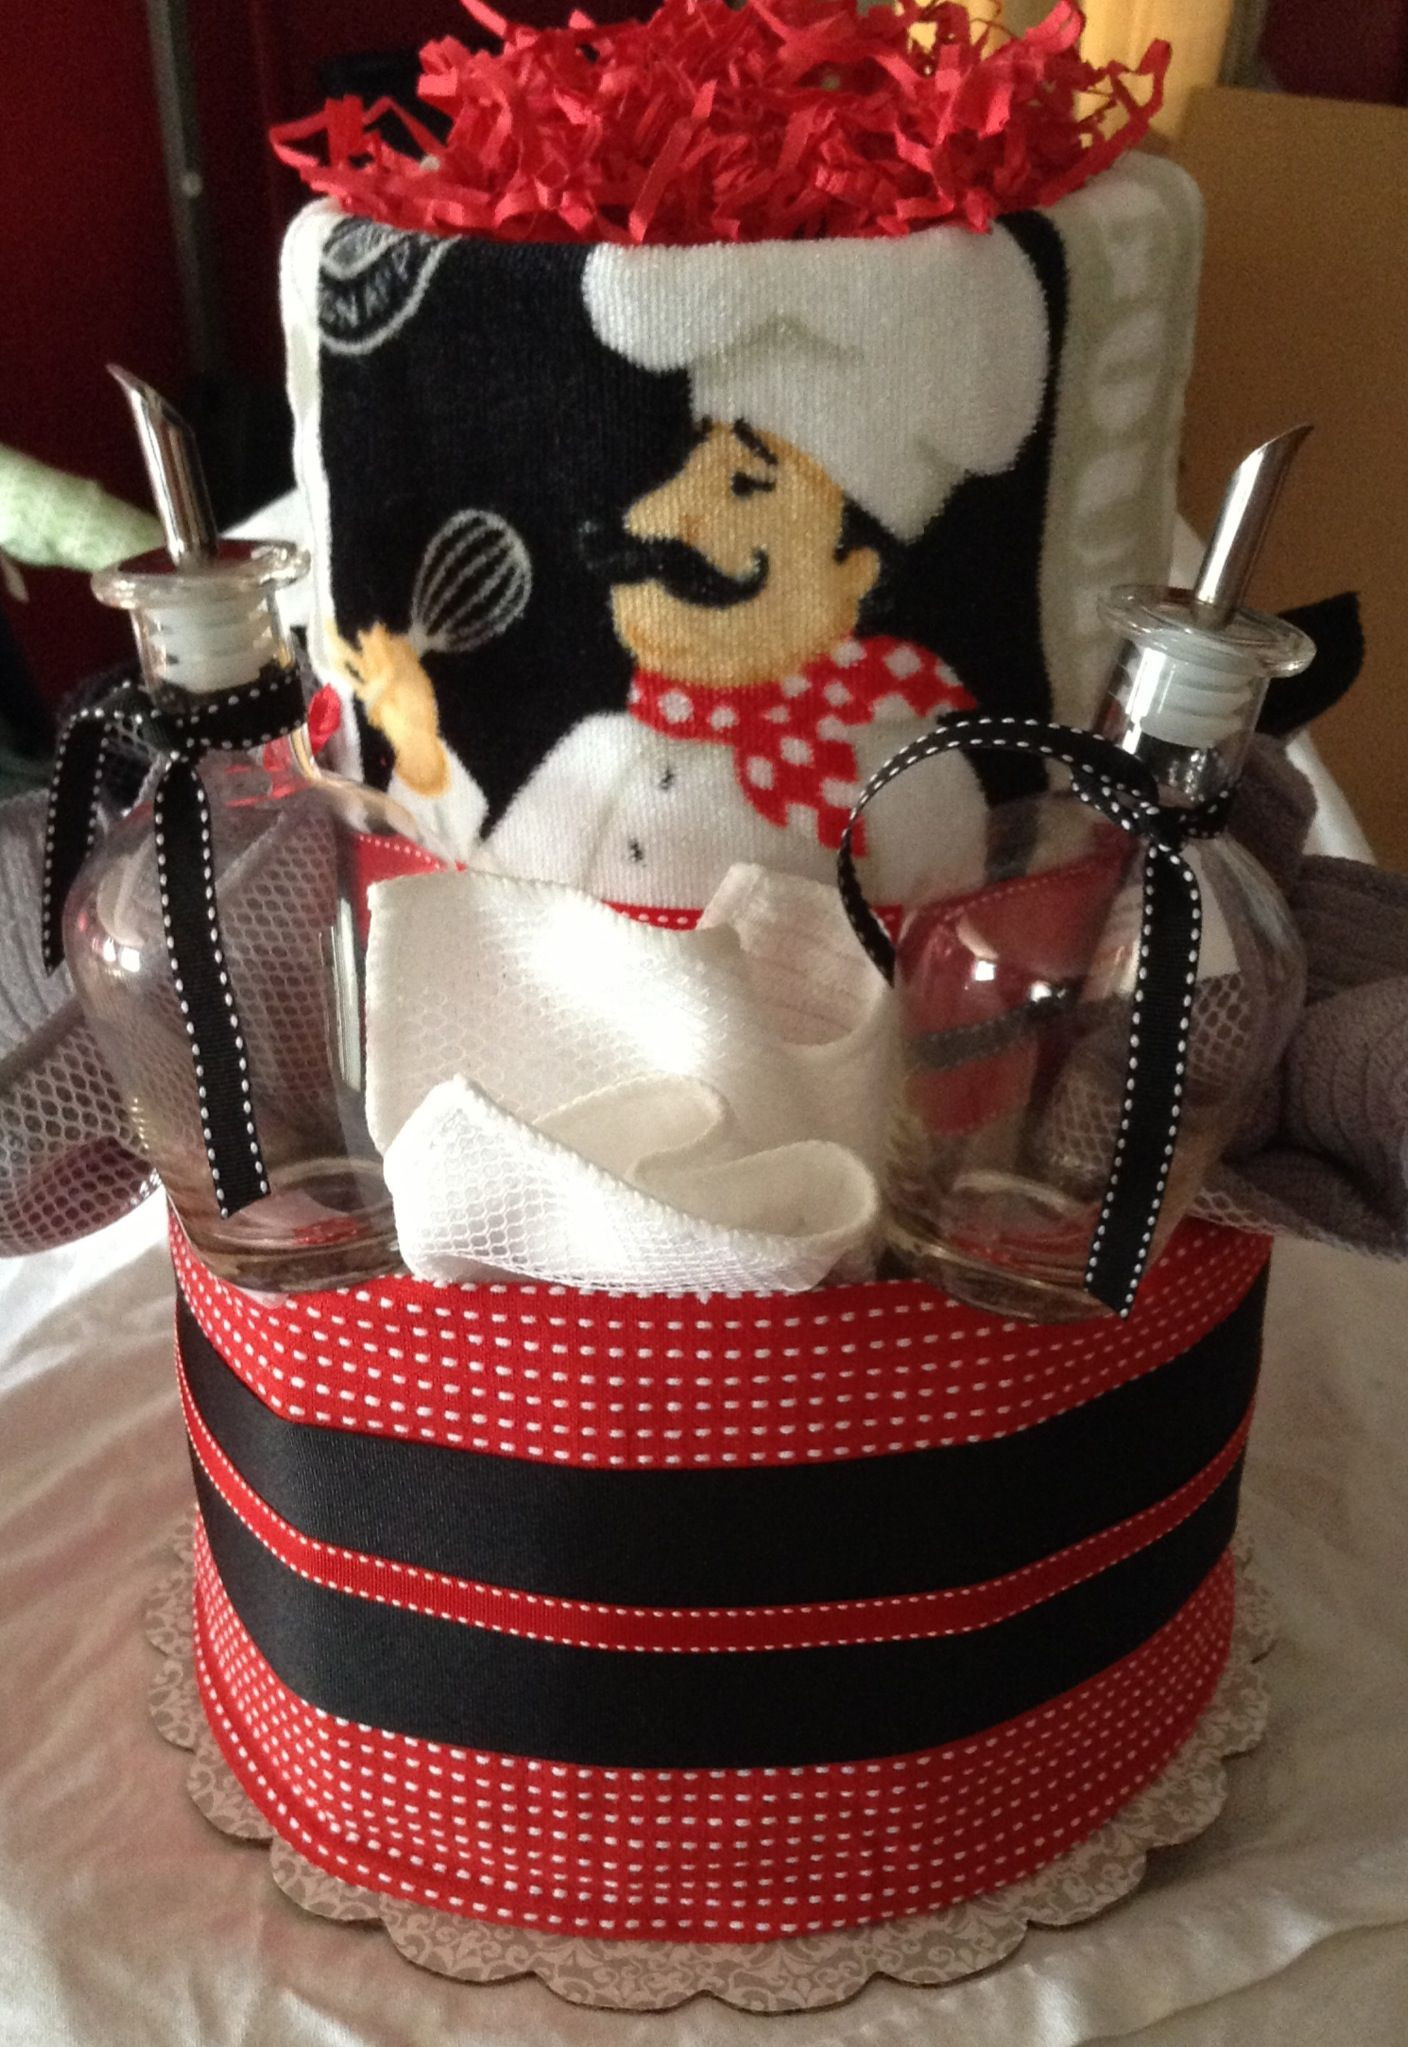 Kitchen Themed Gift Basket Ideas
 Pin by Stryker Seguin on Gift Ideas